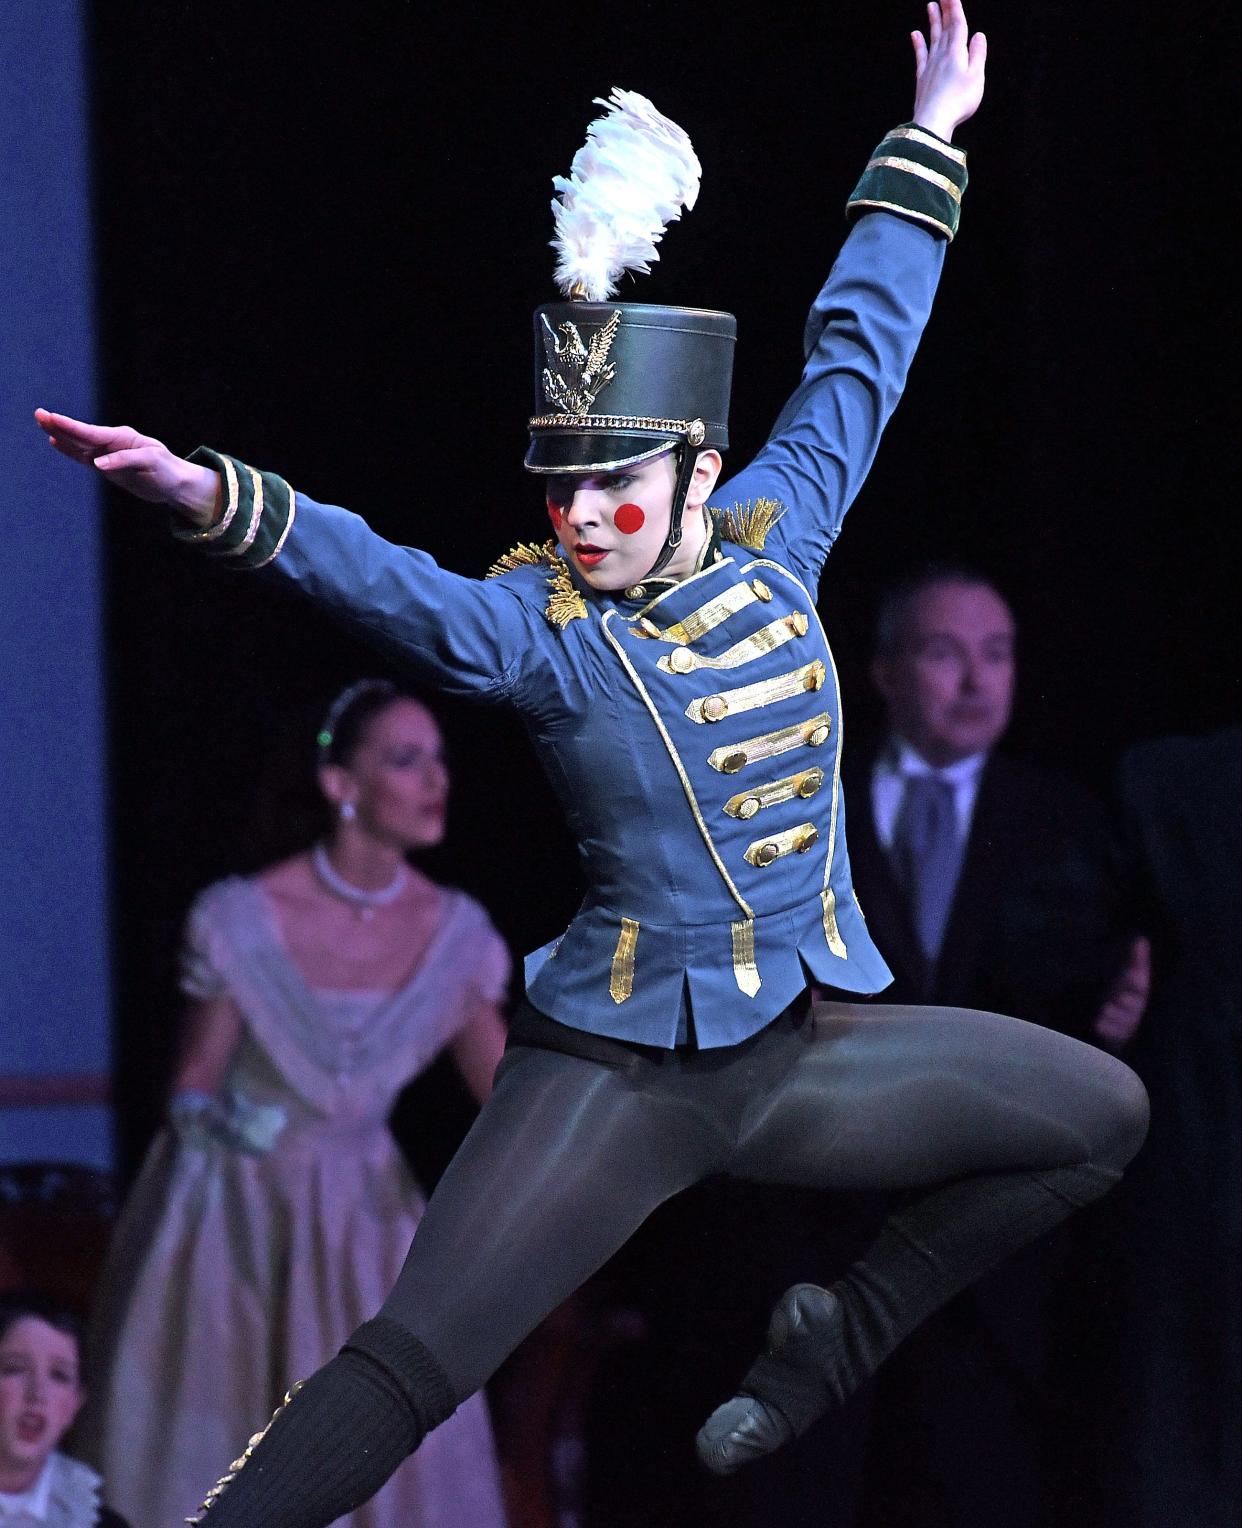 The Soldier Doll comes to life during the Party Scene of the Hanover Theatre Conservatory Ballet's 2018 production of "The Nutcracker."